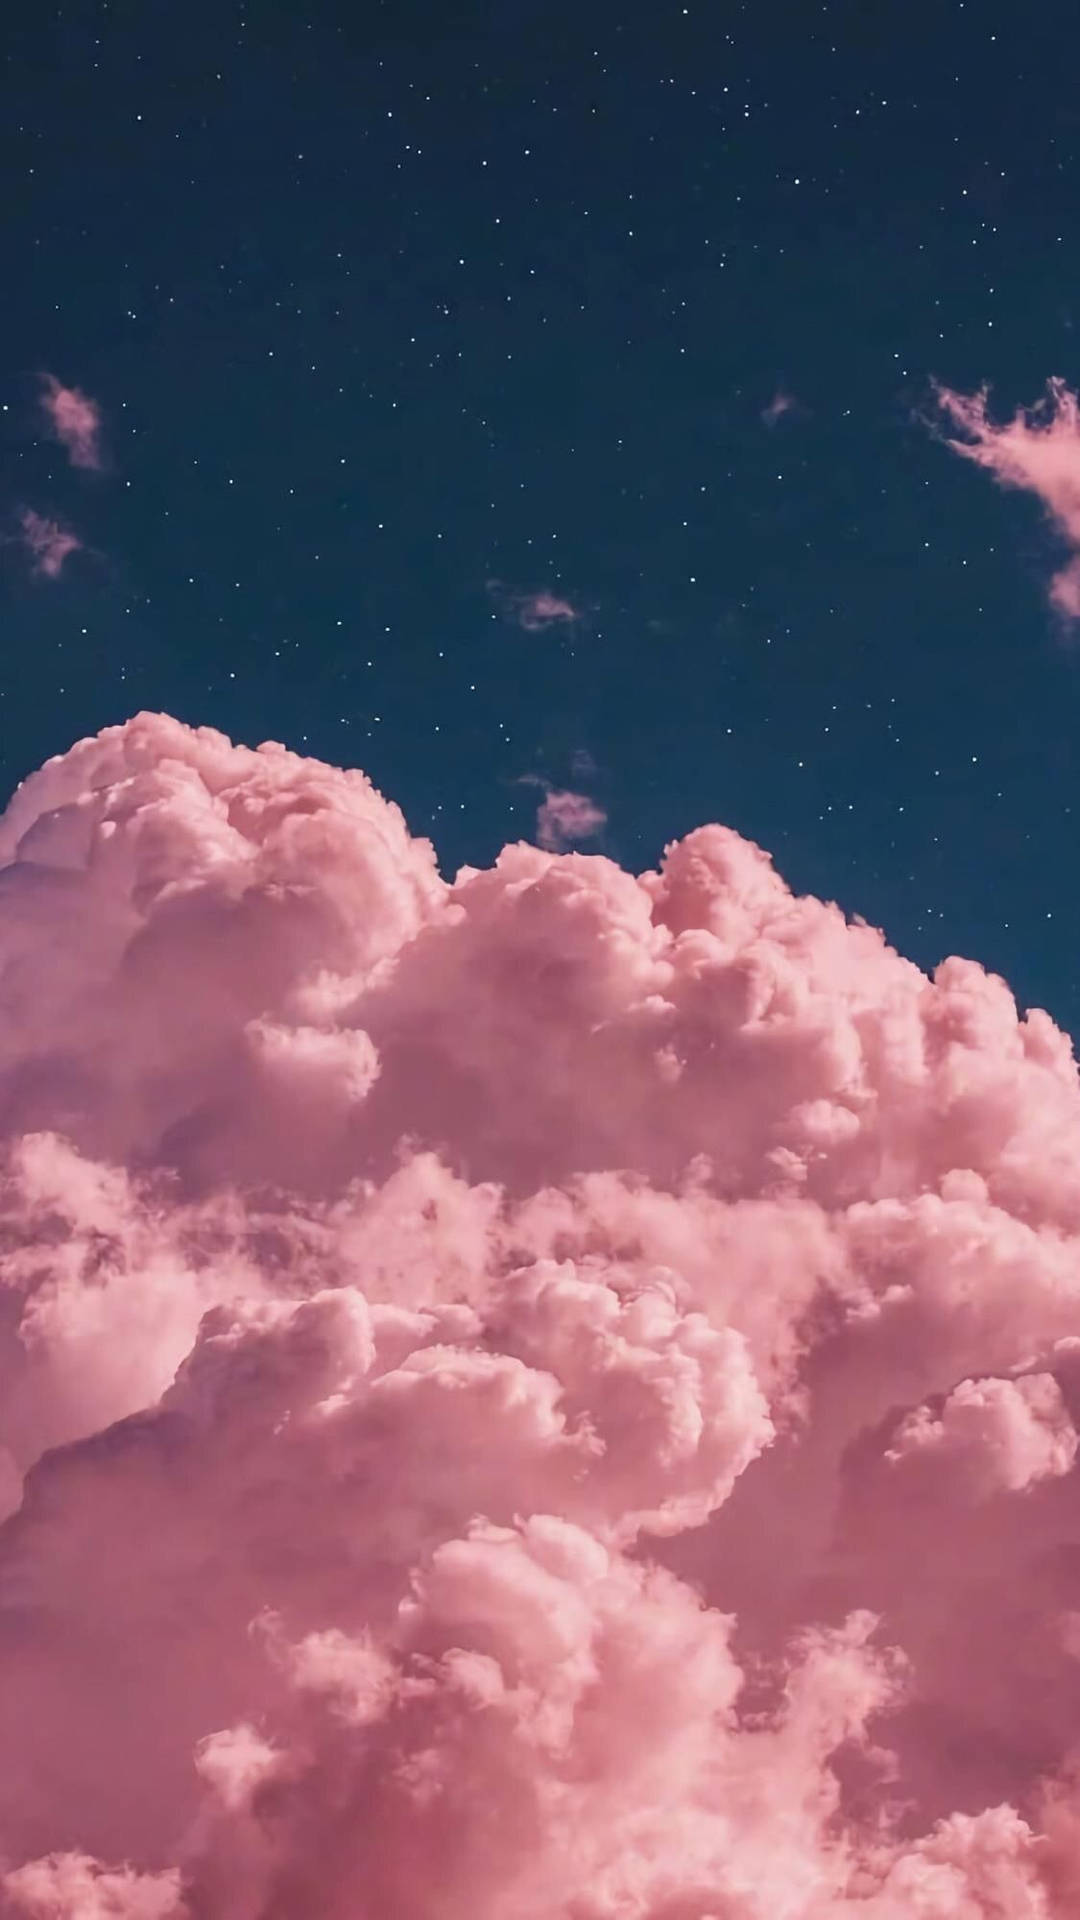 Download Caption: Majestic Pink Clouds At Dusk Wallpaper | Wallpapers.com